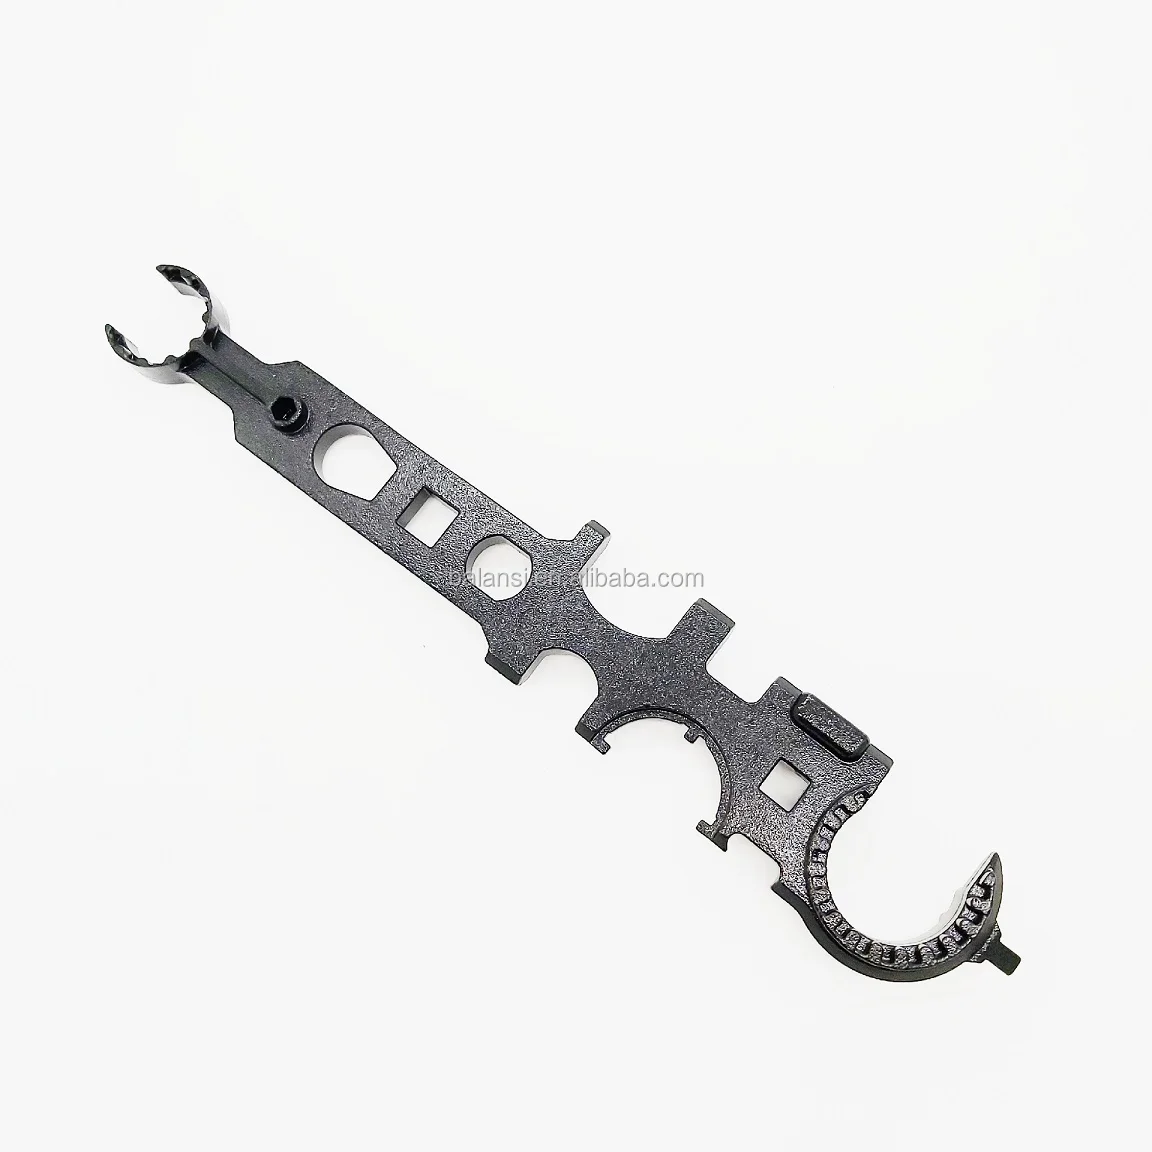 

AR 15 M4 Combo Wrench Tool AR15 Combo Armorer's multi functioned Wrench Tool for handguard muzzle barrel lock ring nut buffer, Black